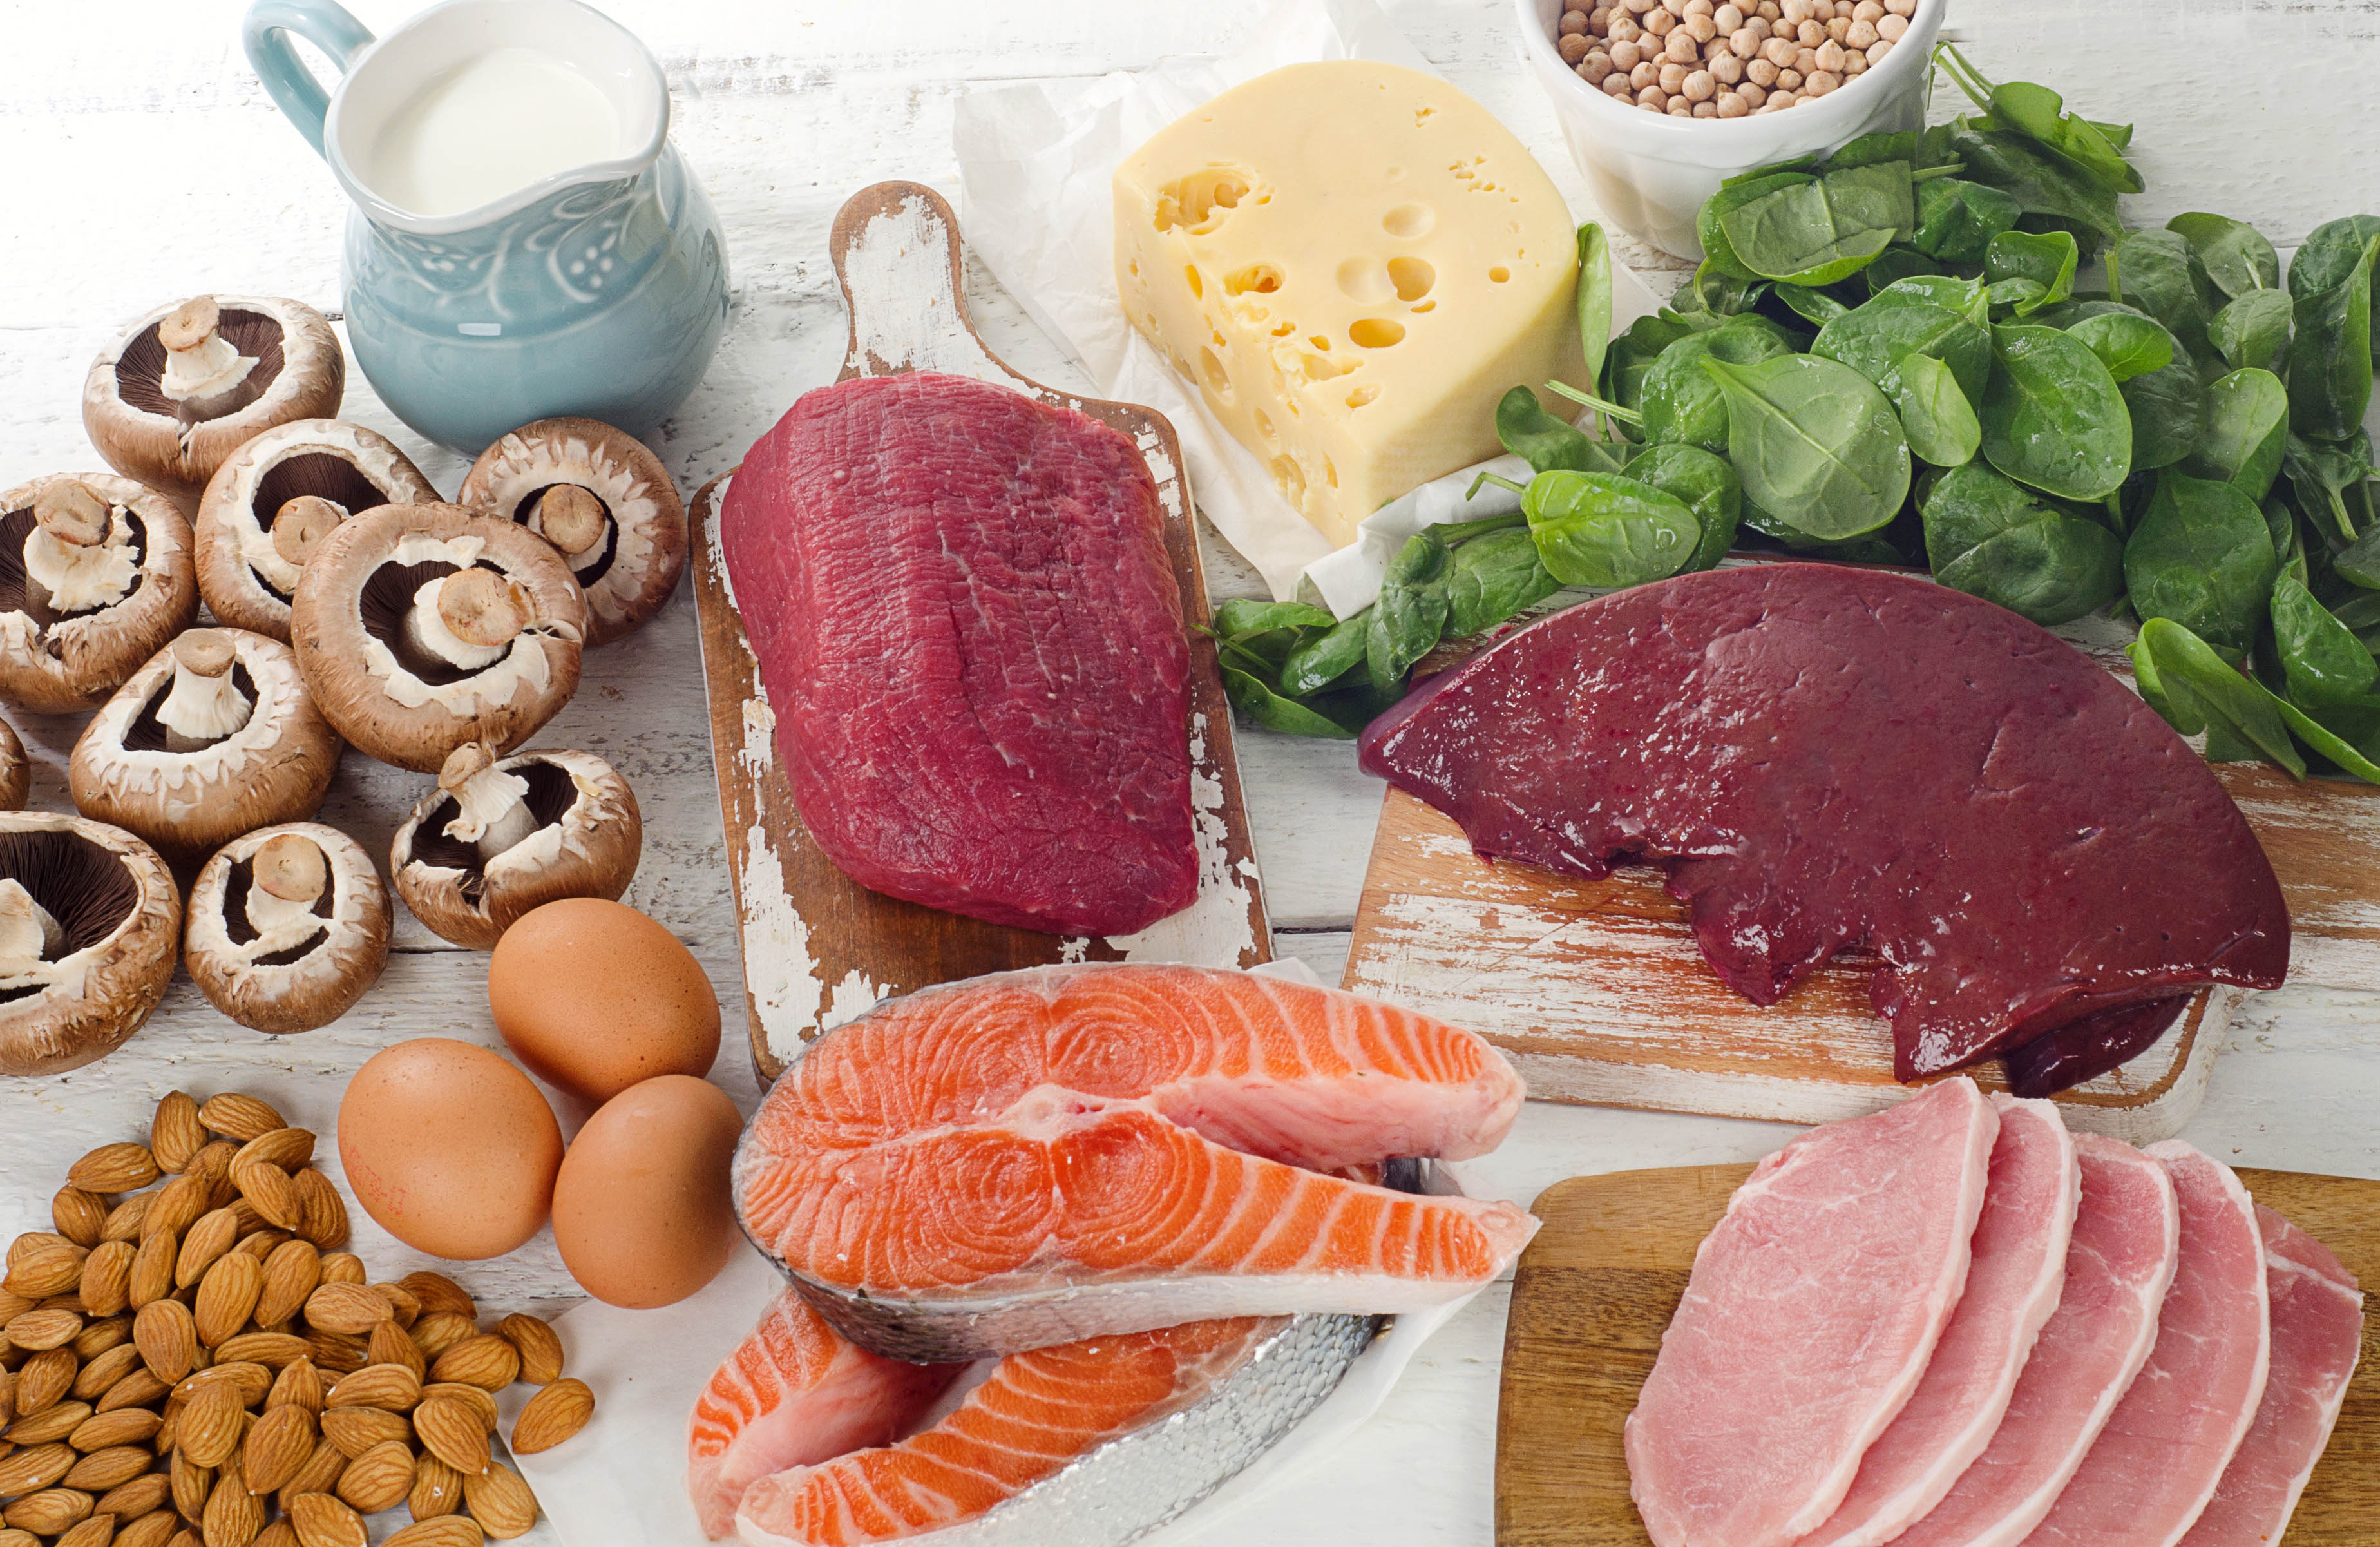 Foods that are high in vitamin B12 - including mushrooms, milk, beef liver, eggs, almonds, salmon, pork chops, spinach, cheese